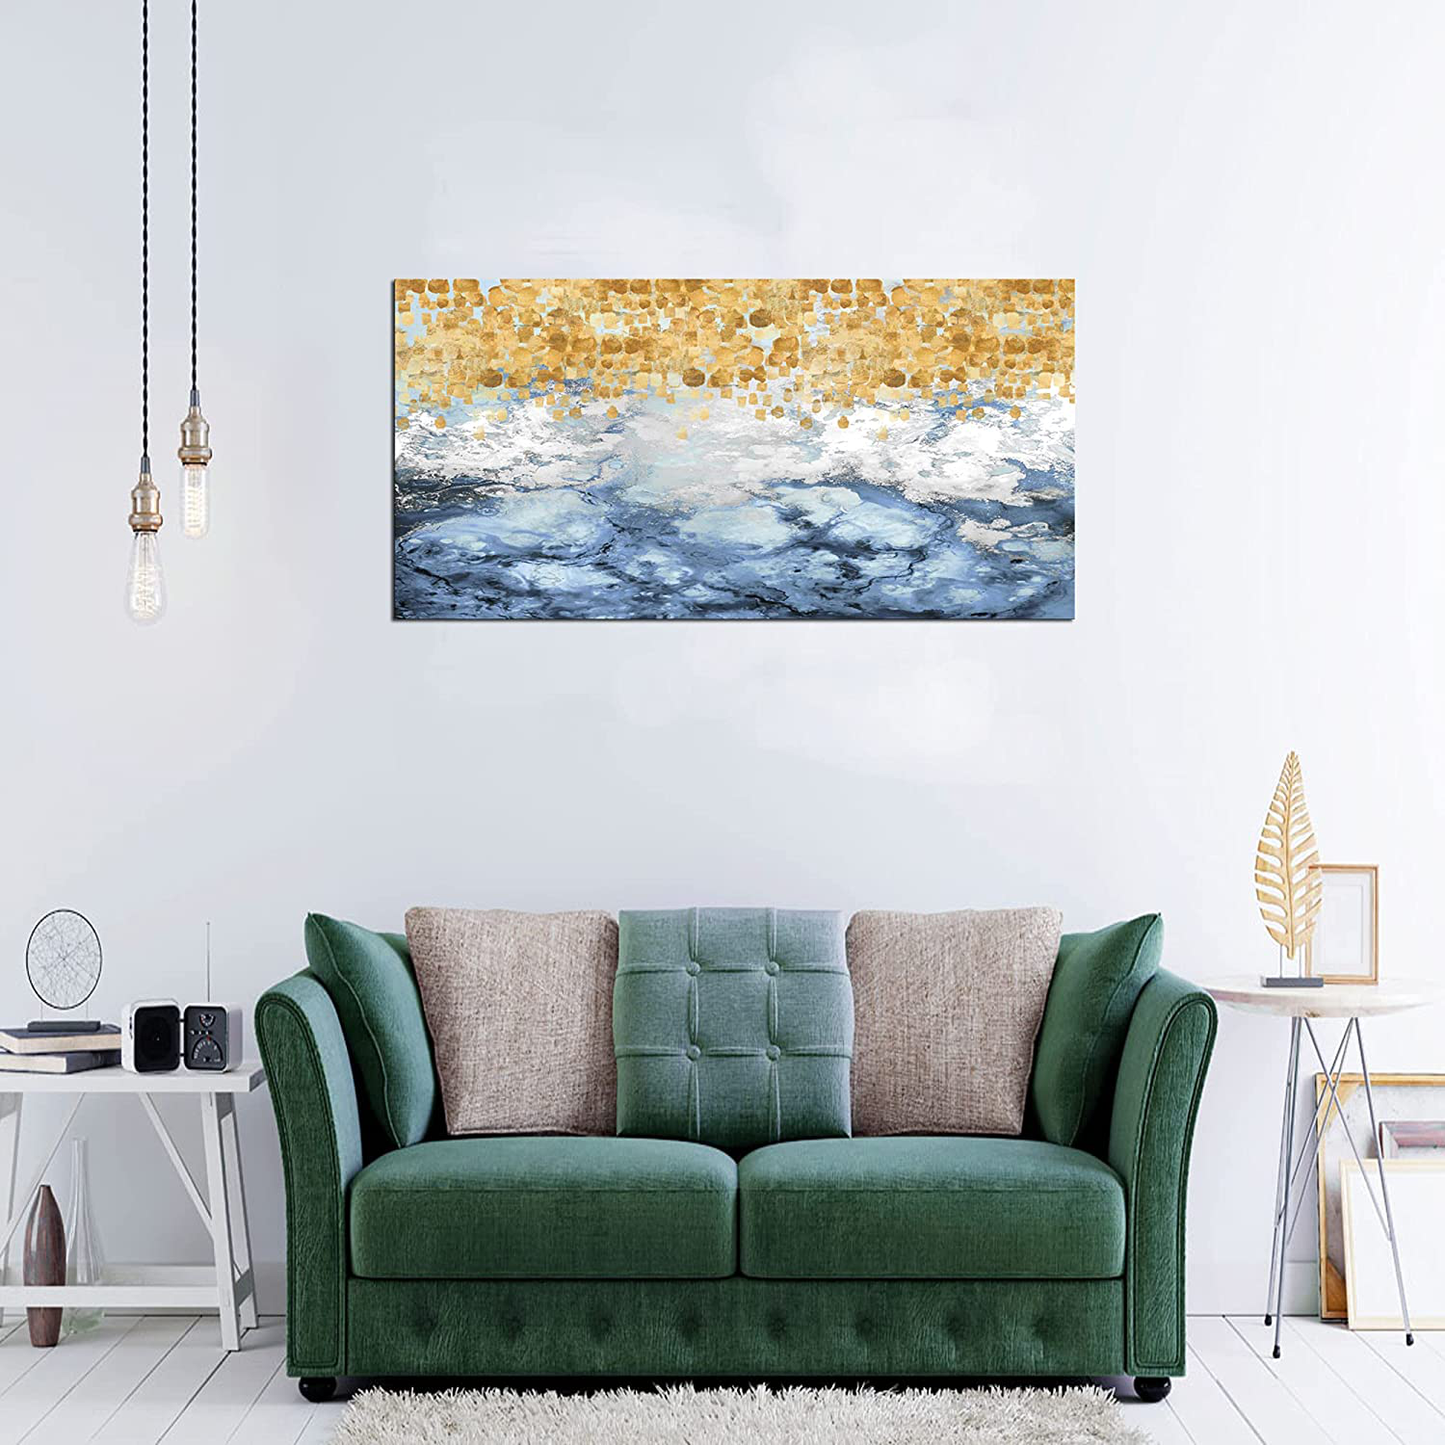 XXMWallArt FC2062 Abstract Painting Modern Decor Wall Art Gold Colorful Abstract Painting Background Canvas for Living Room Bedroom Kitchen Home and Office Wall Decor